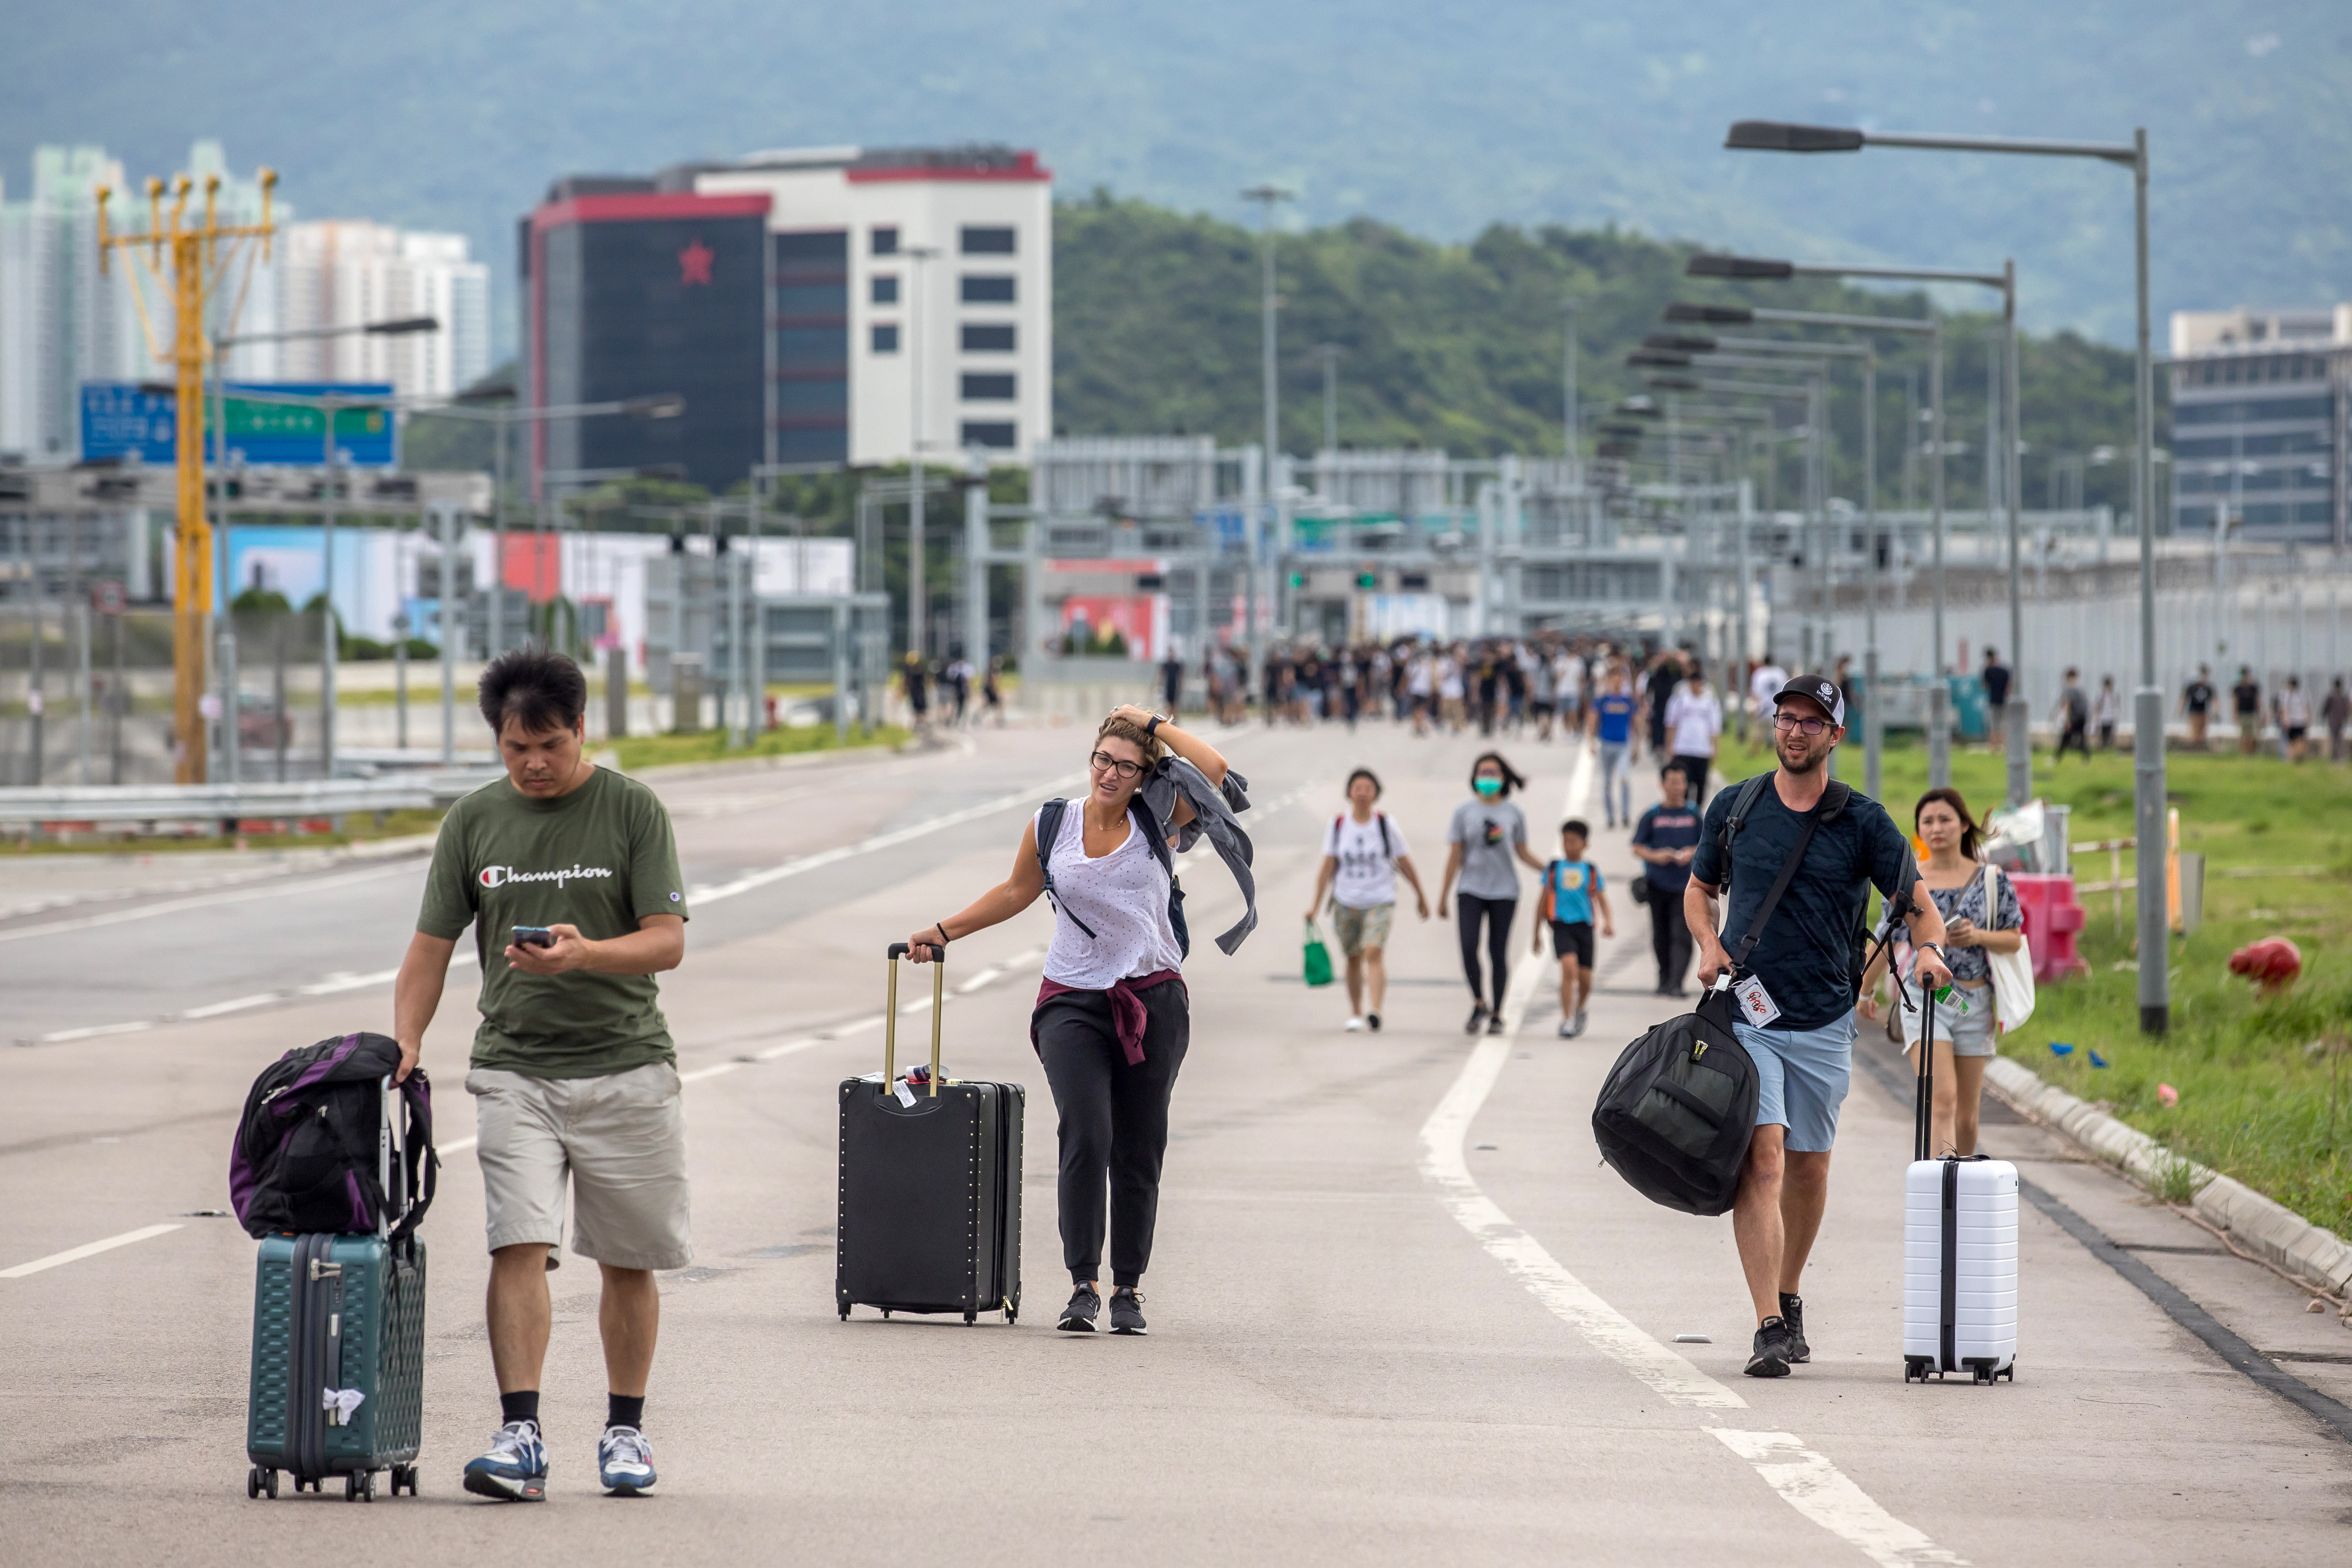 Travelers walk with their luggage along a road towards the Hong Kong International Airport during a protest in Hong Kong, China, on Sunday, Sept. 1, 2019. (Paul Yeung/Bloomberg via Getty Images)